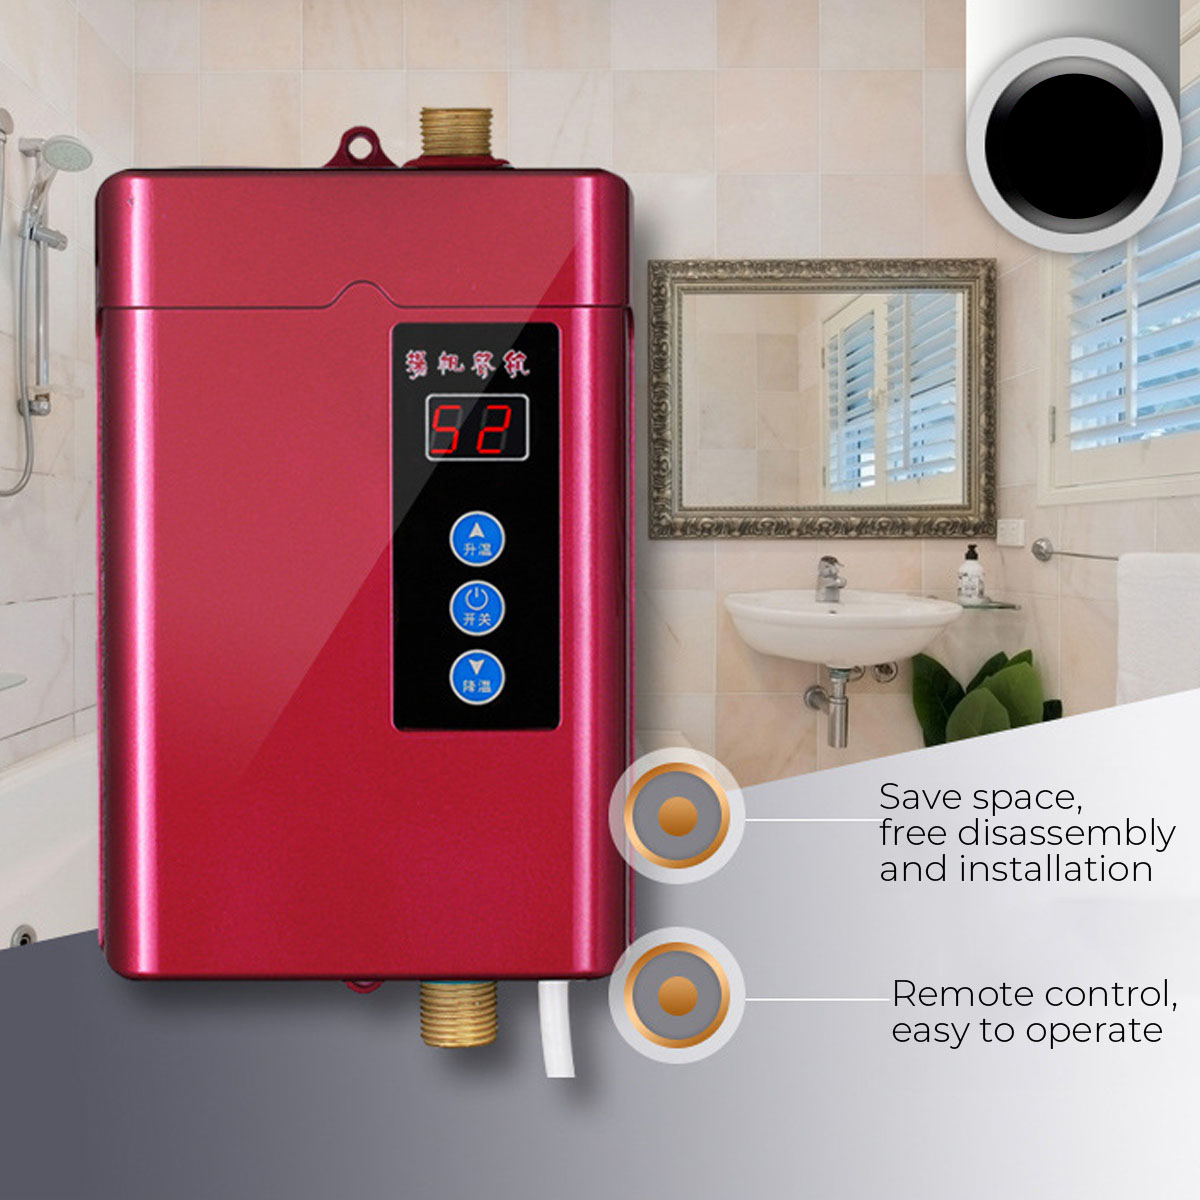 Electric-Water-Heater-Instant-Hot-Tankless-Under-Sink-Tap-BathroomKitchen-1803717-5